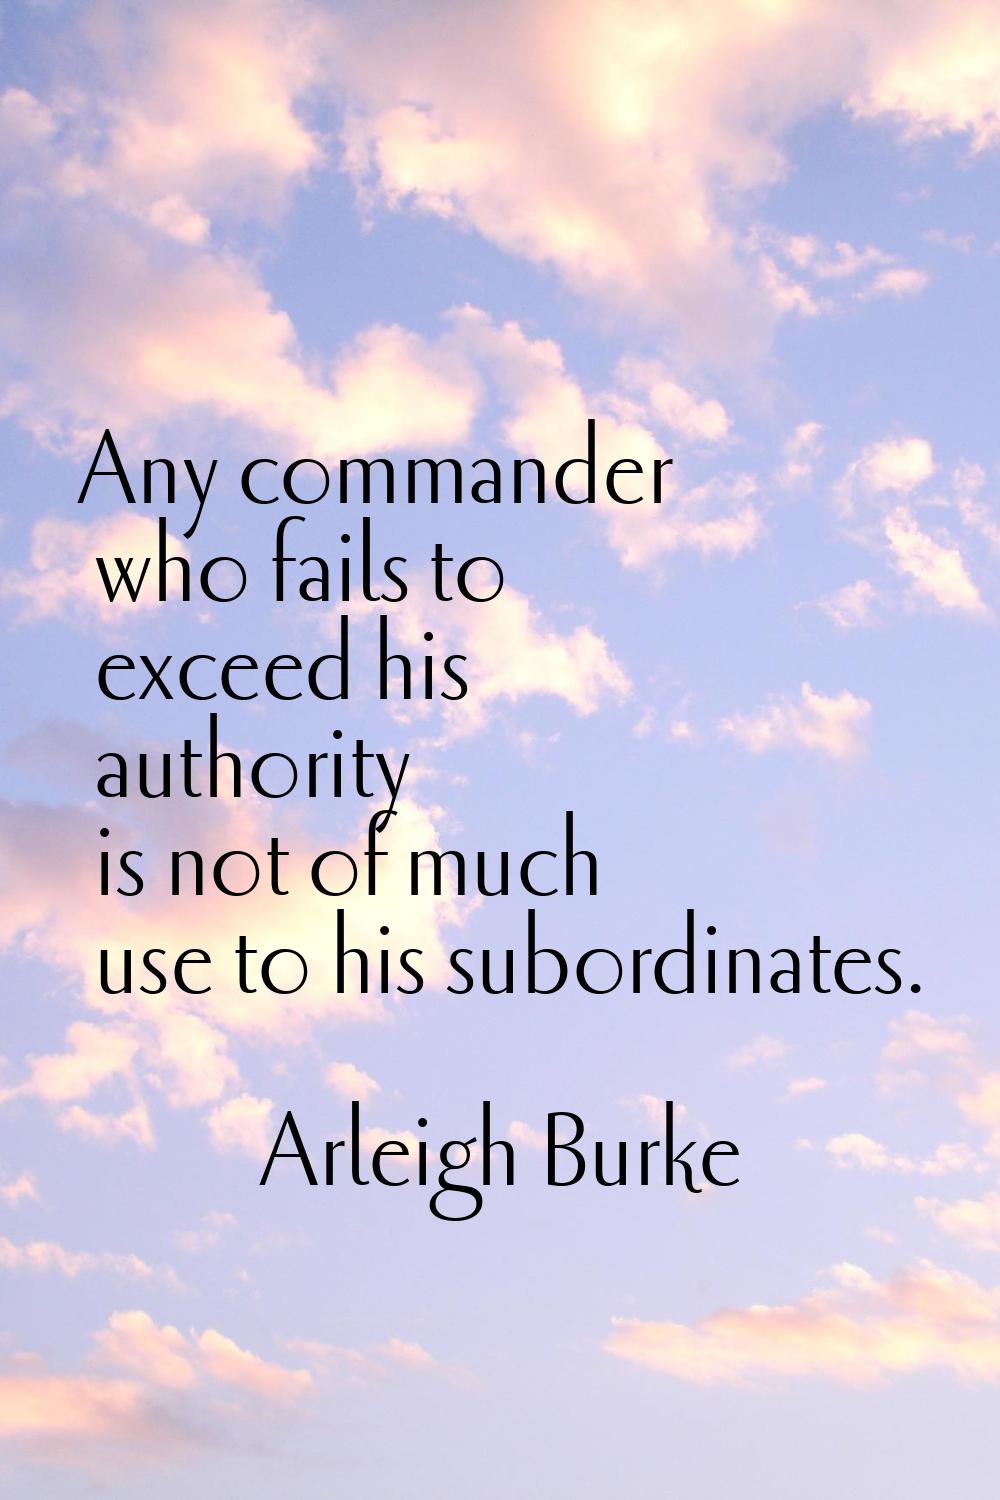 Any commander who fails to exceed his authority is not of much use to his subordinates.